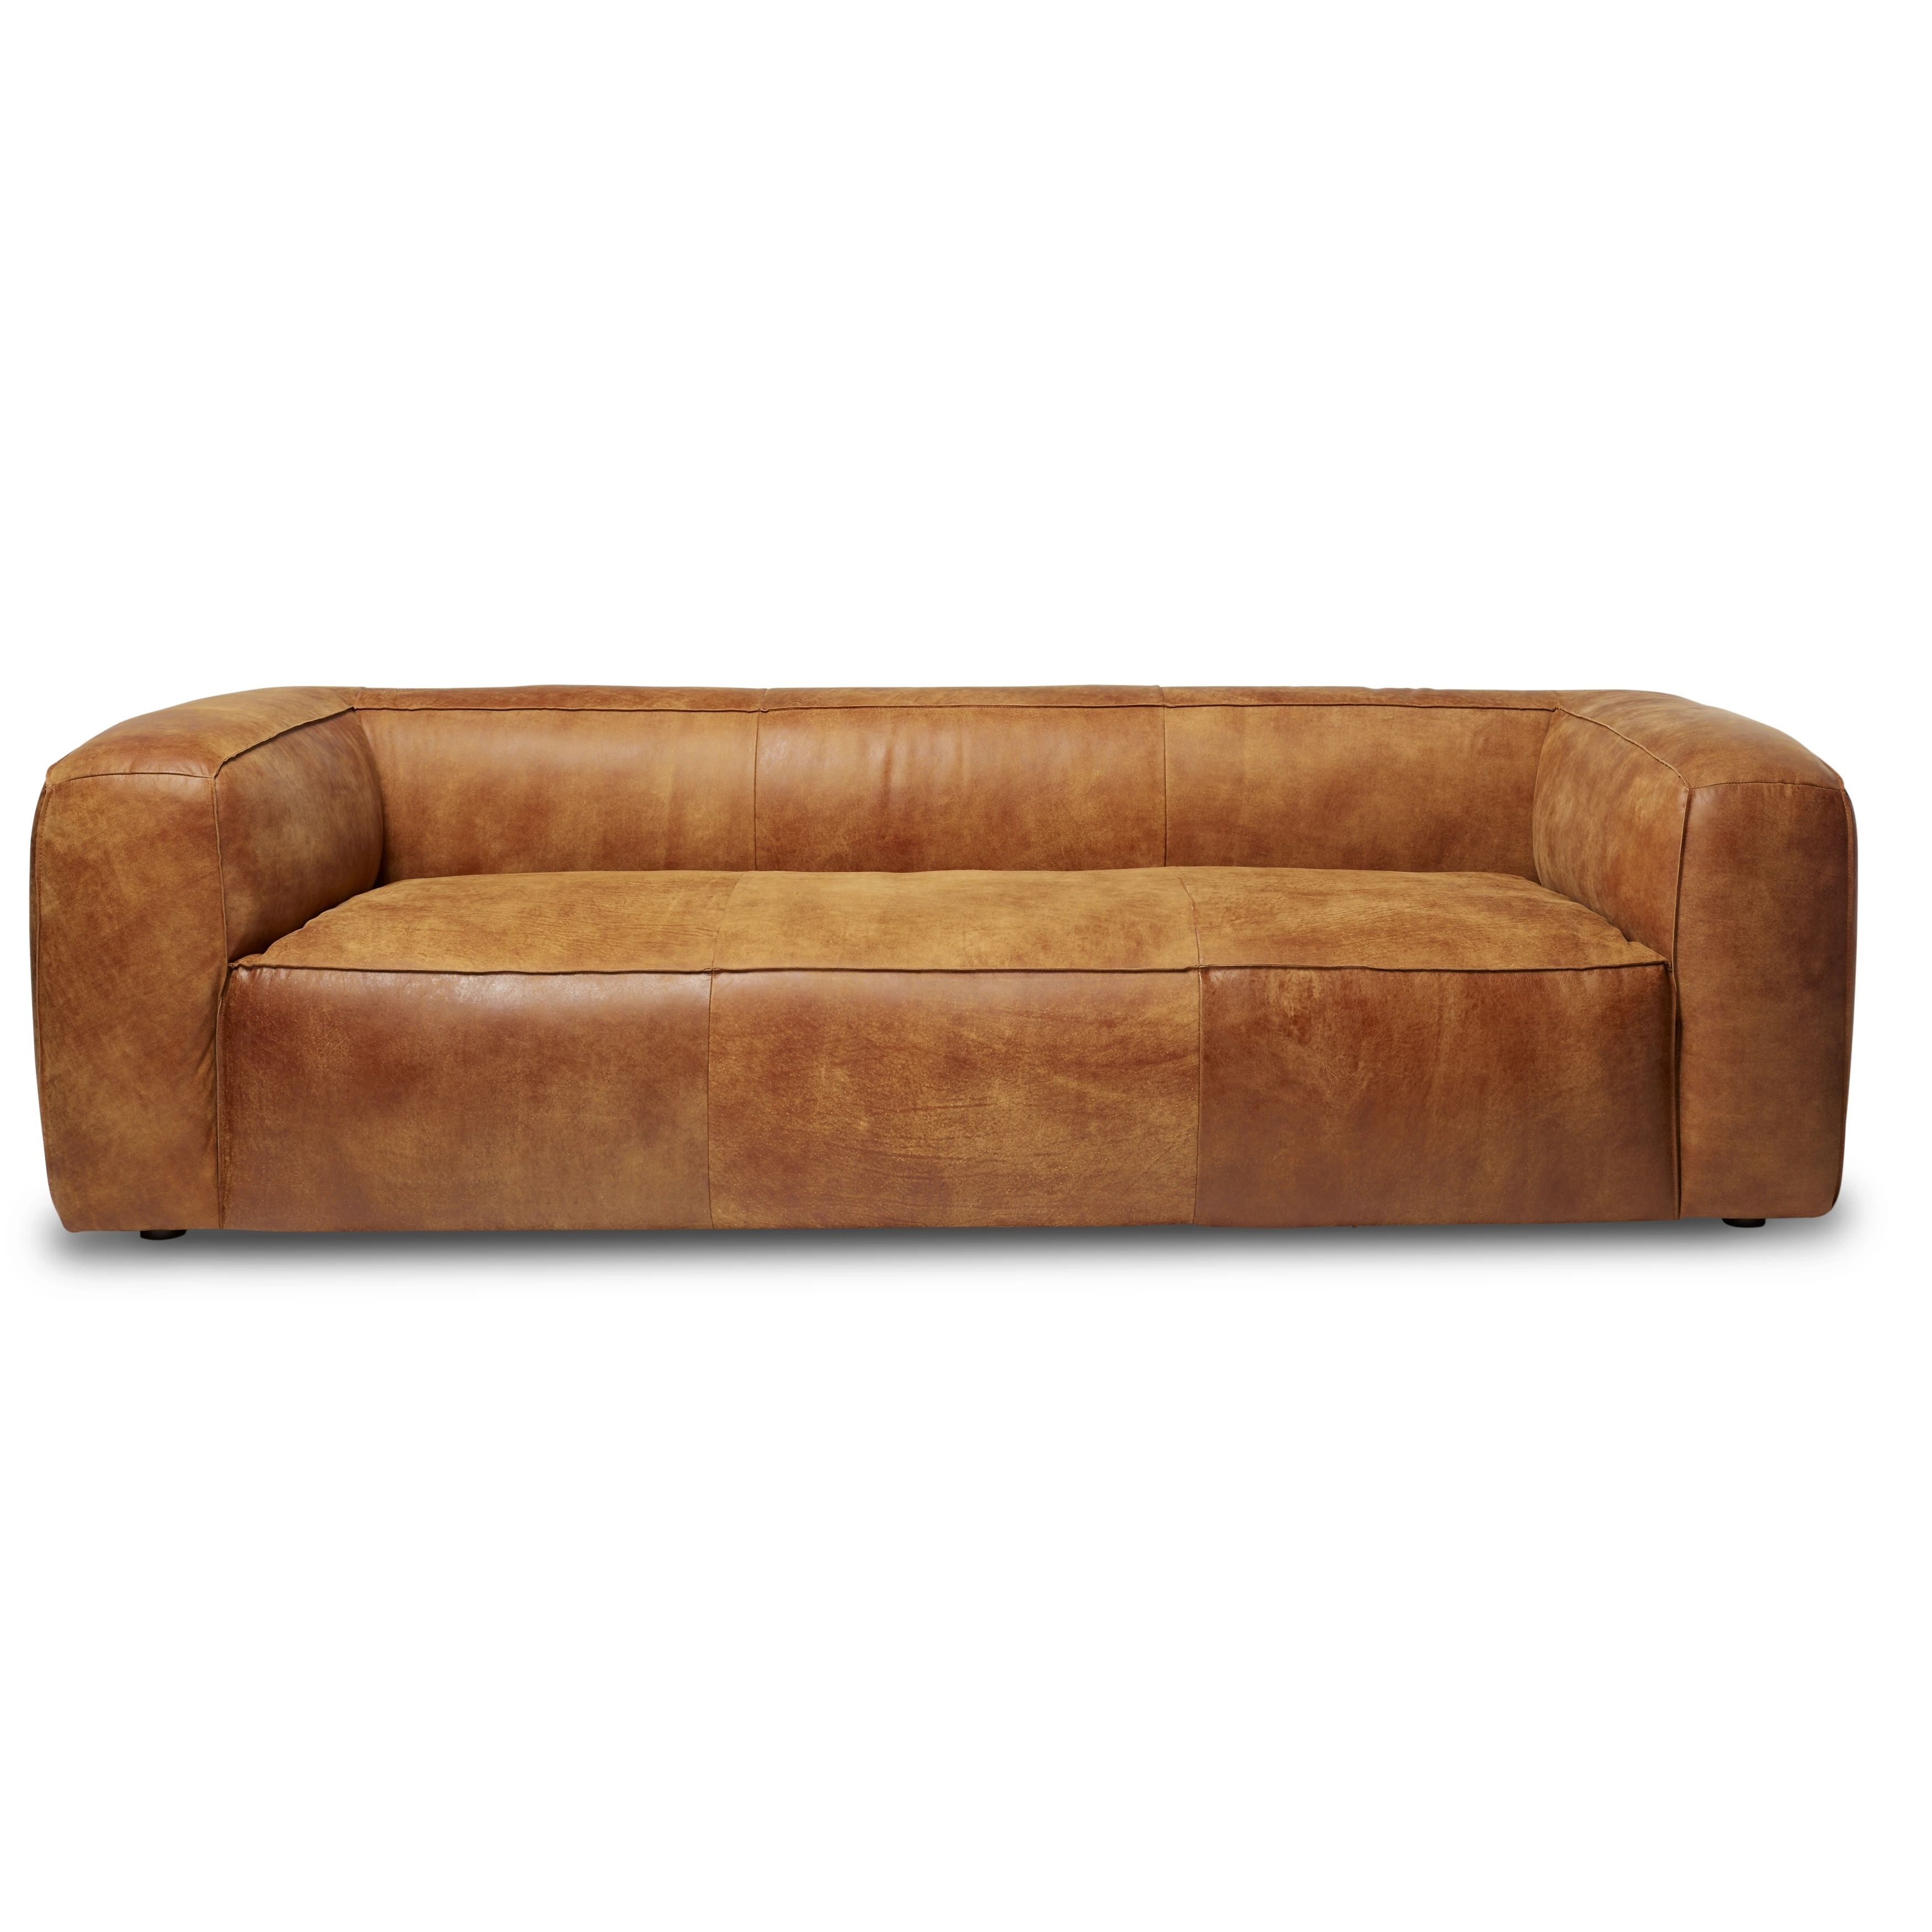 Strick & Bolton Diva Outback Bridle Italian Leather Sofa | Bed Bath & Beyond